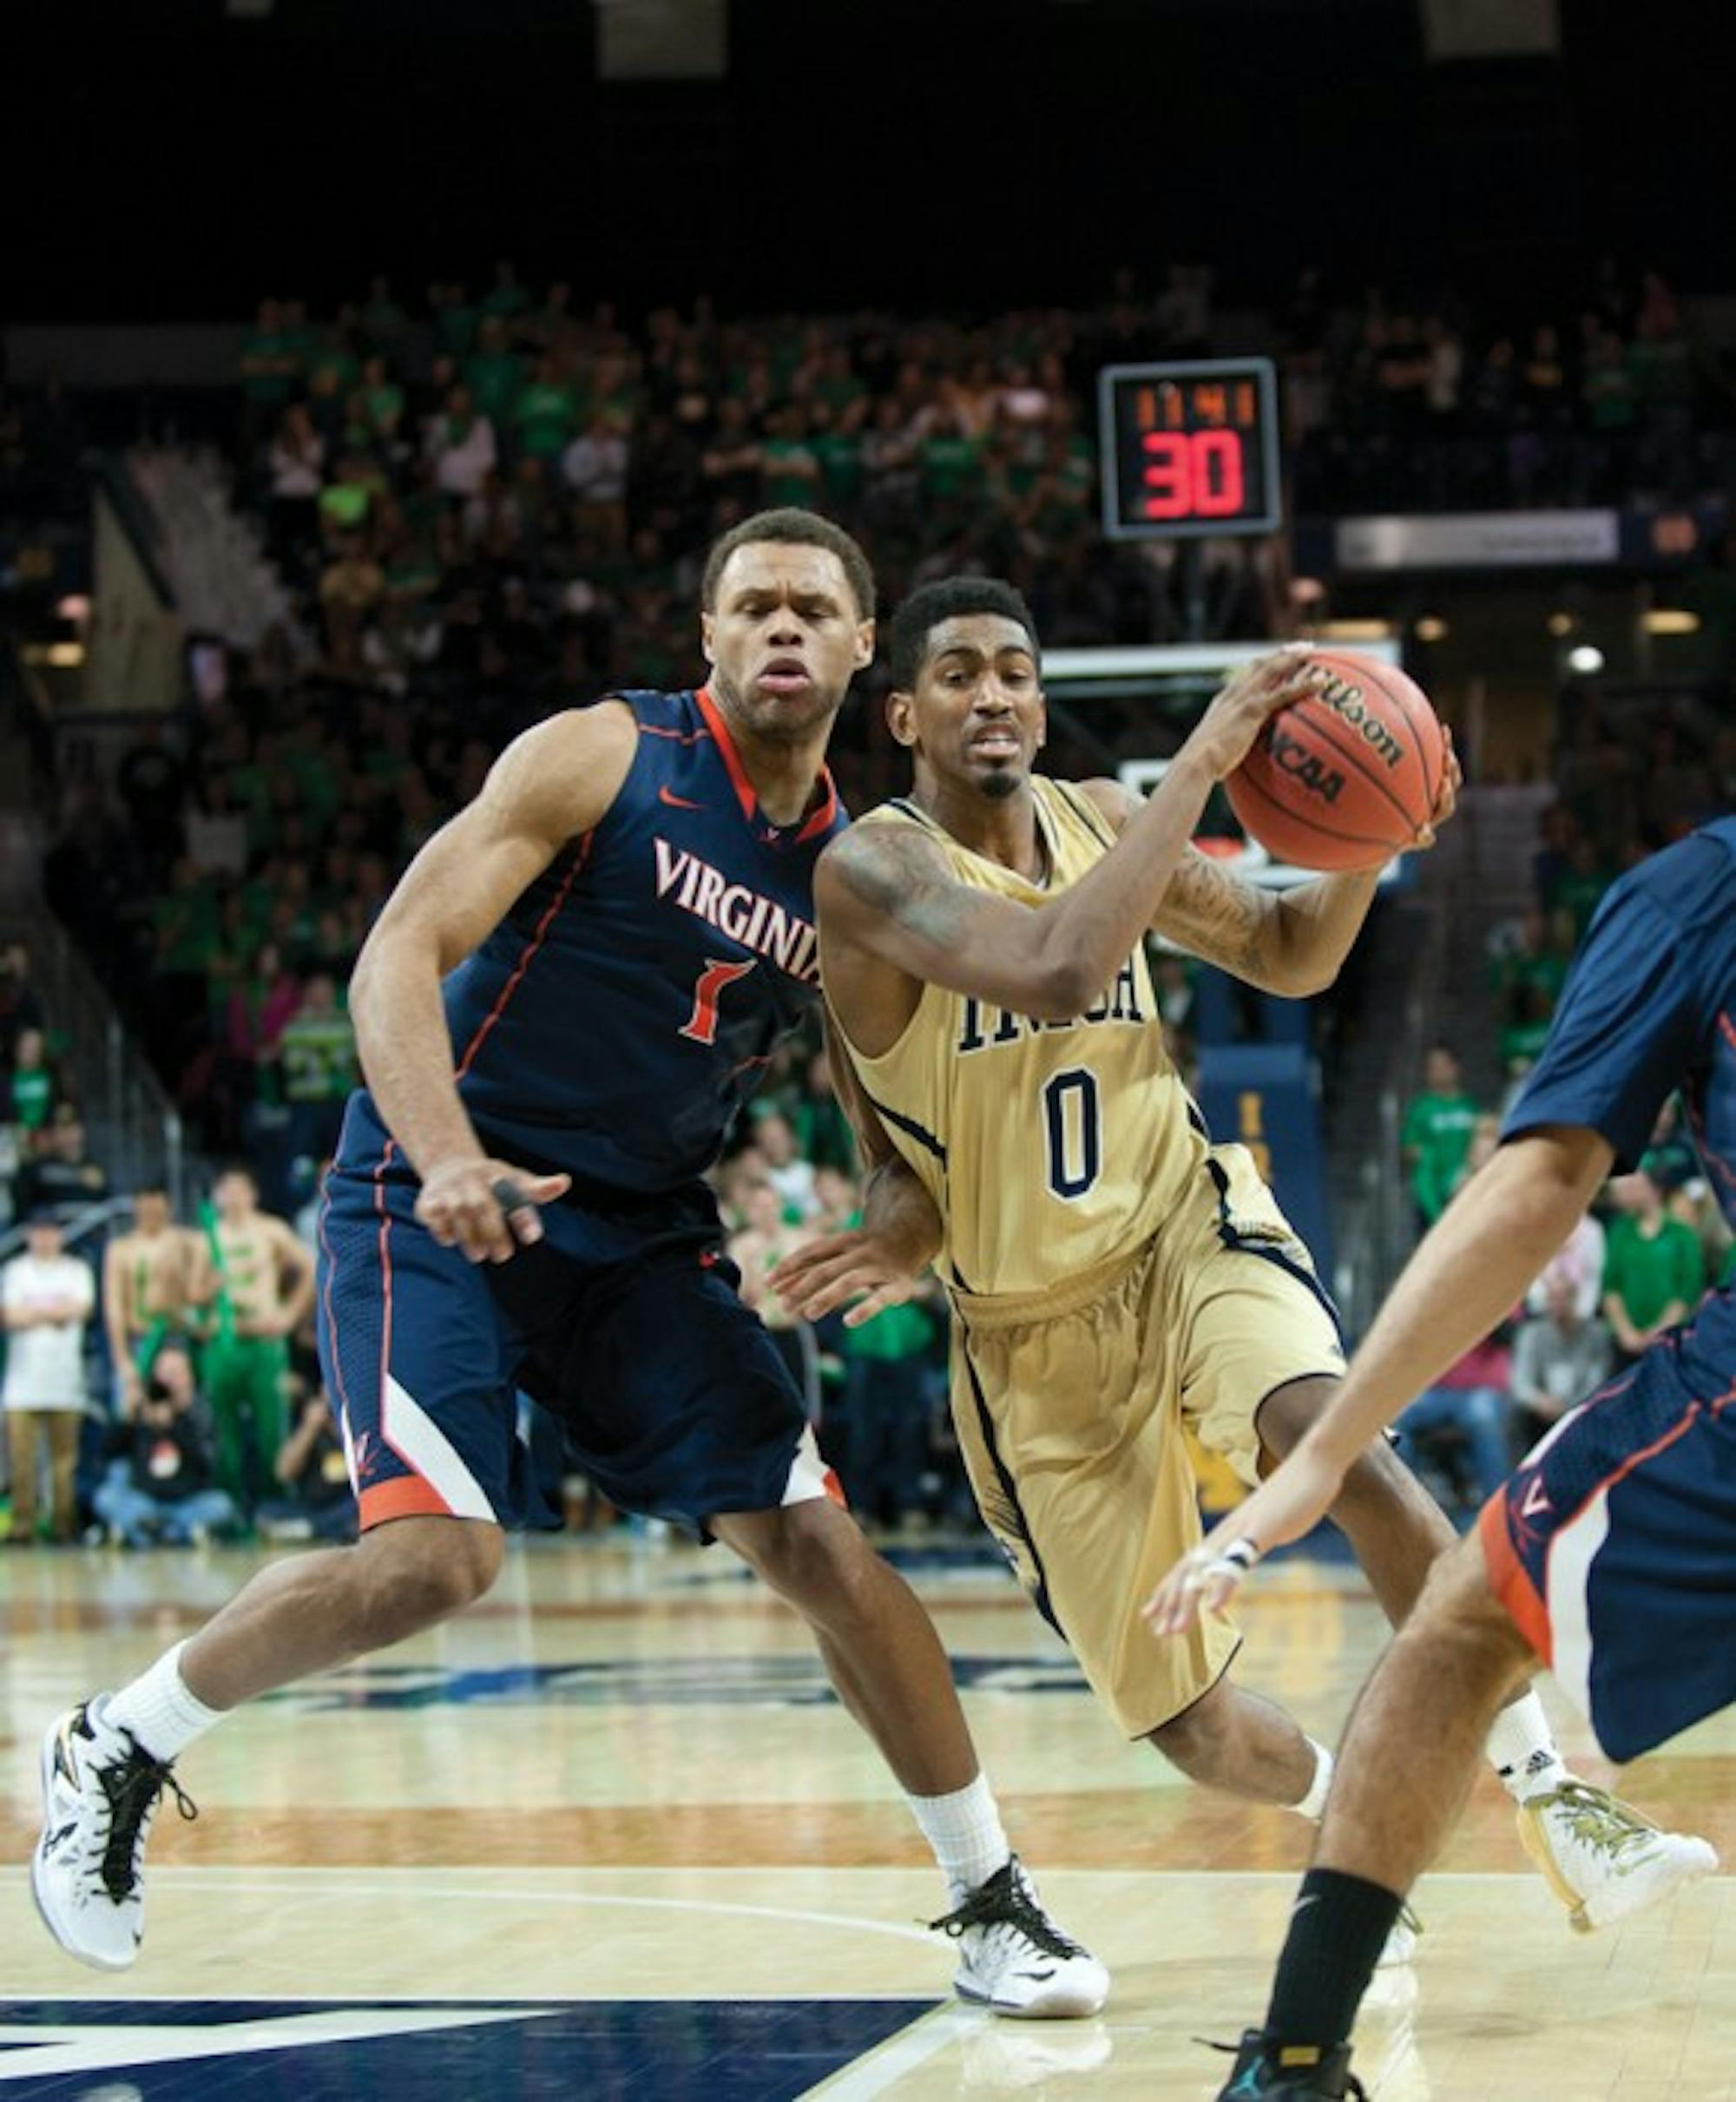 Senior guard Eric Atkins drives during Notre Dame’s 68-53 loss to Virginia on Jan. 28. Atkins leads the Irish in total assists this season.